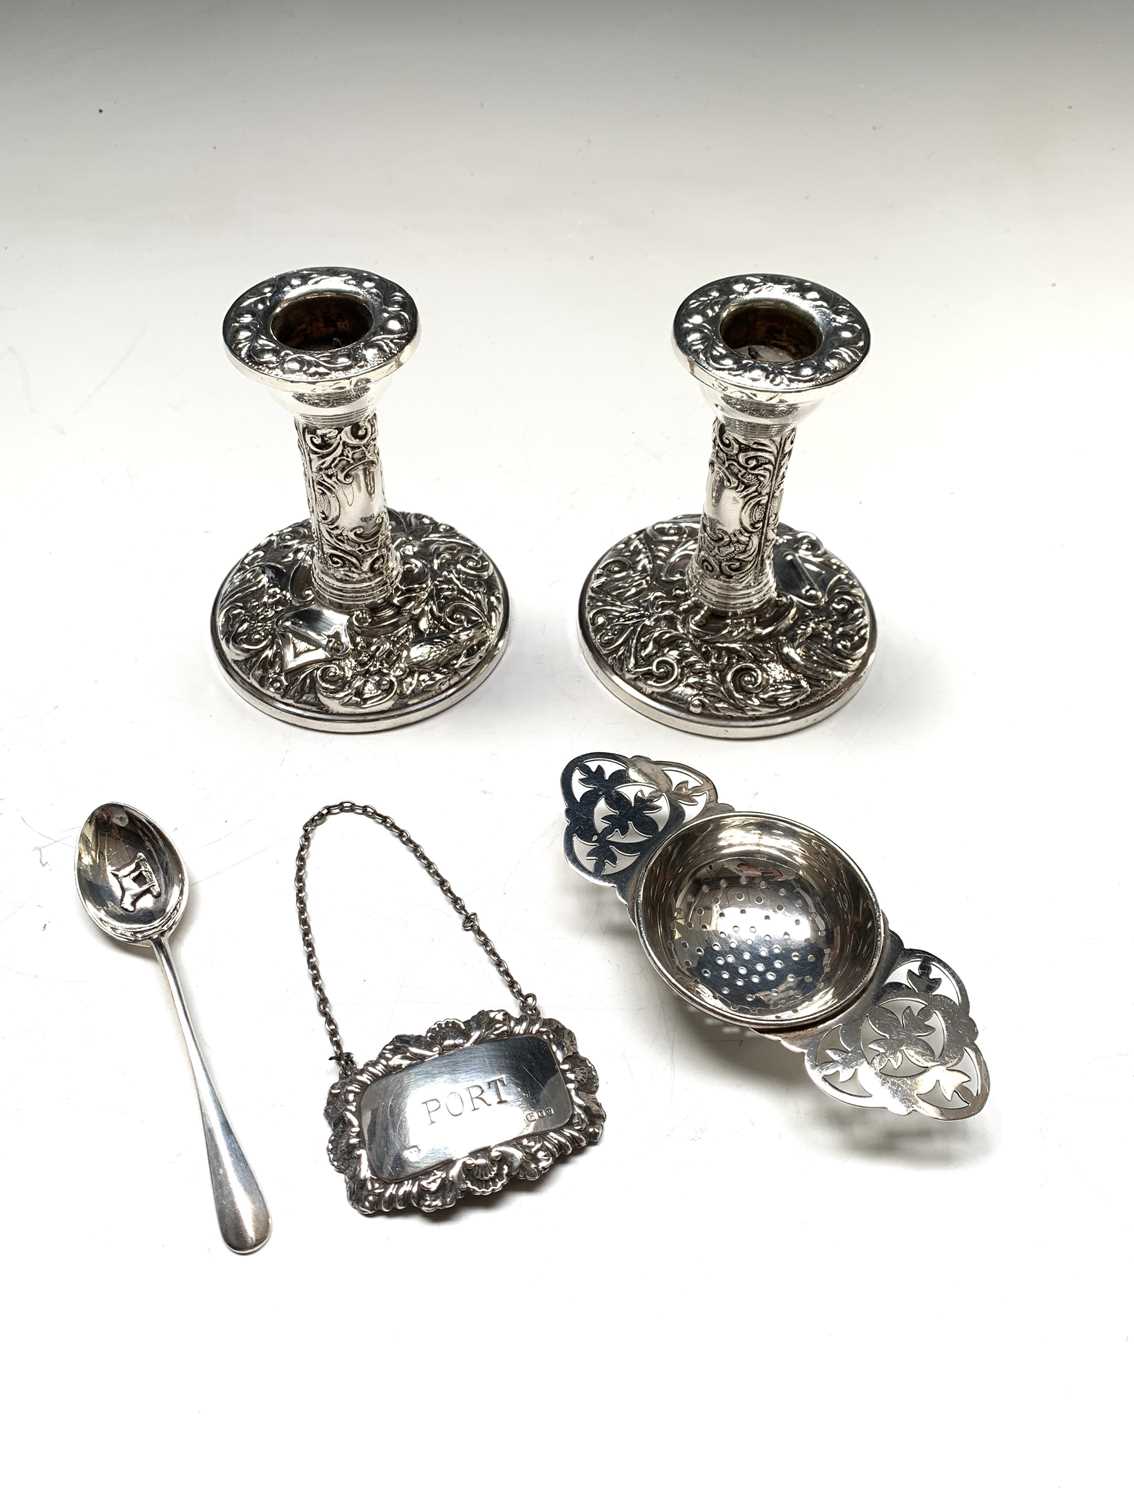 A pair of low embossed filled silver candlesticks, a silver tea strainer, a silver port label and